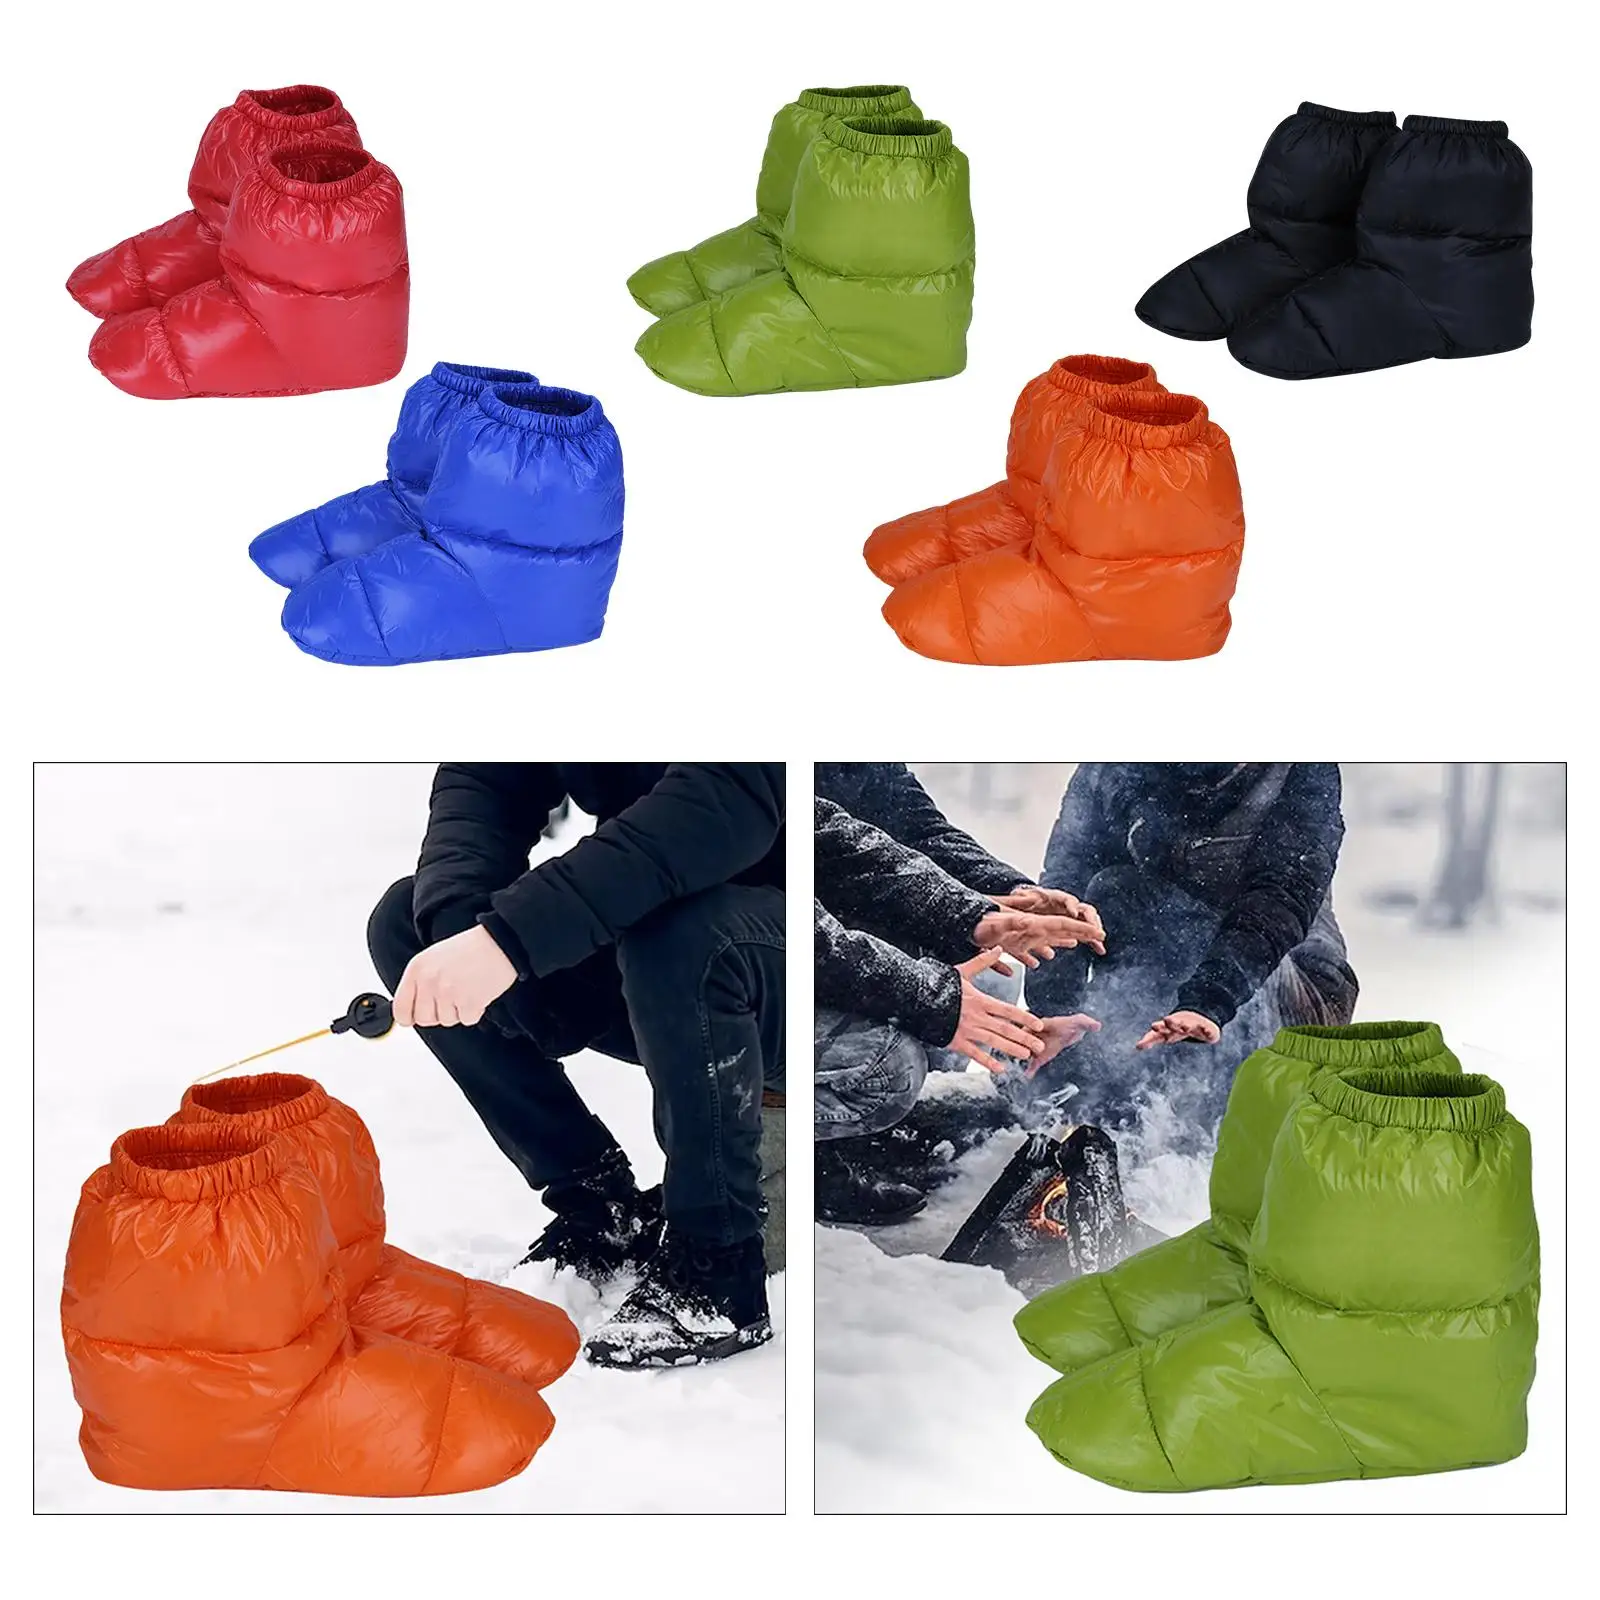 Winter Down Slippers Bootie Shoes Women Men Waterproof Lightweight Feet Cover Socks for Backpacking Indoor Office Fishing Hiking